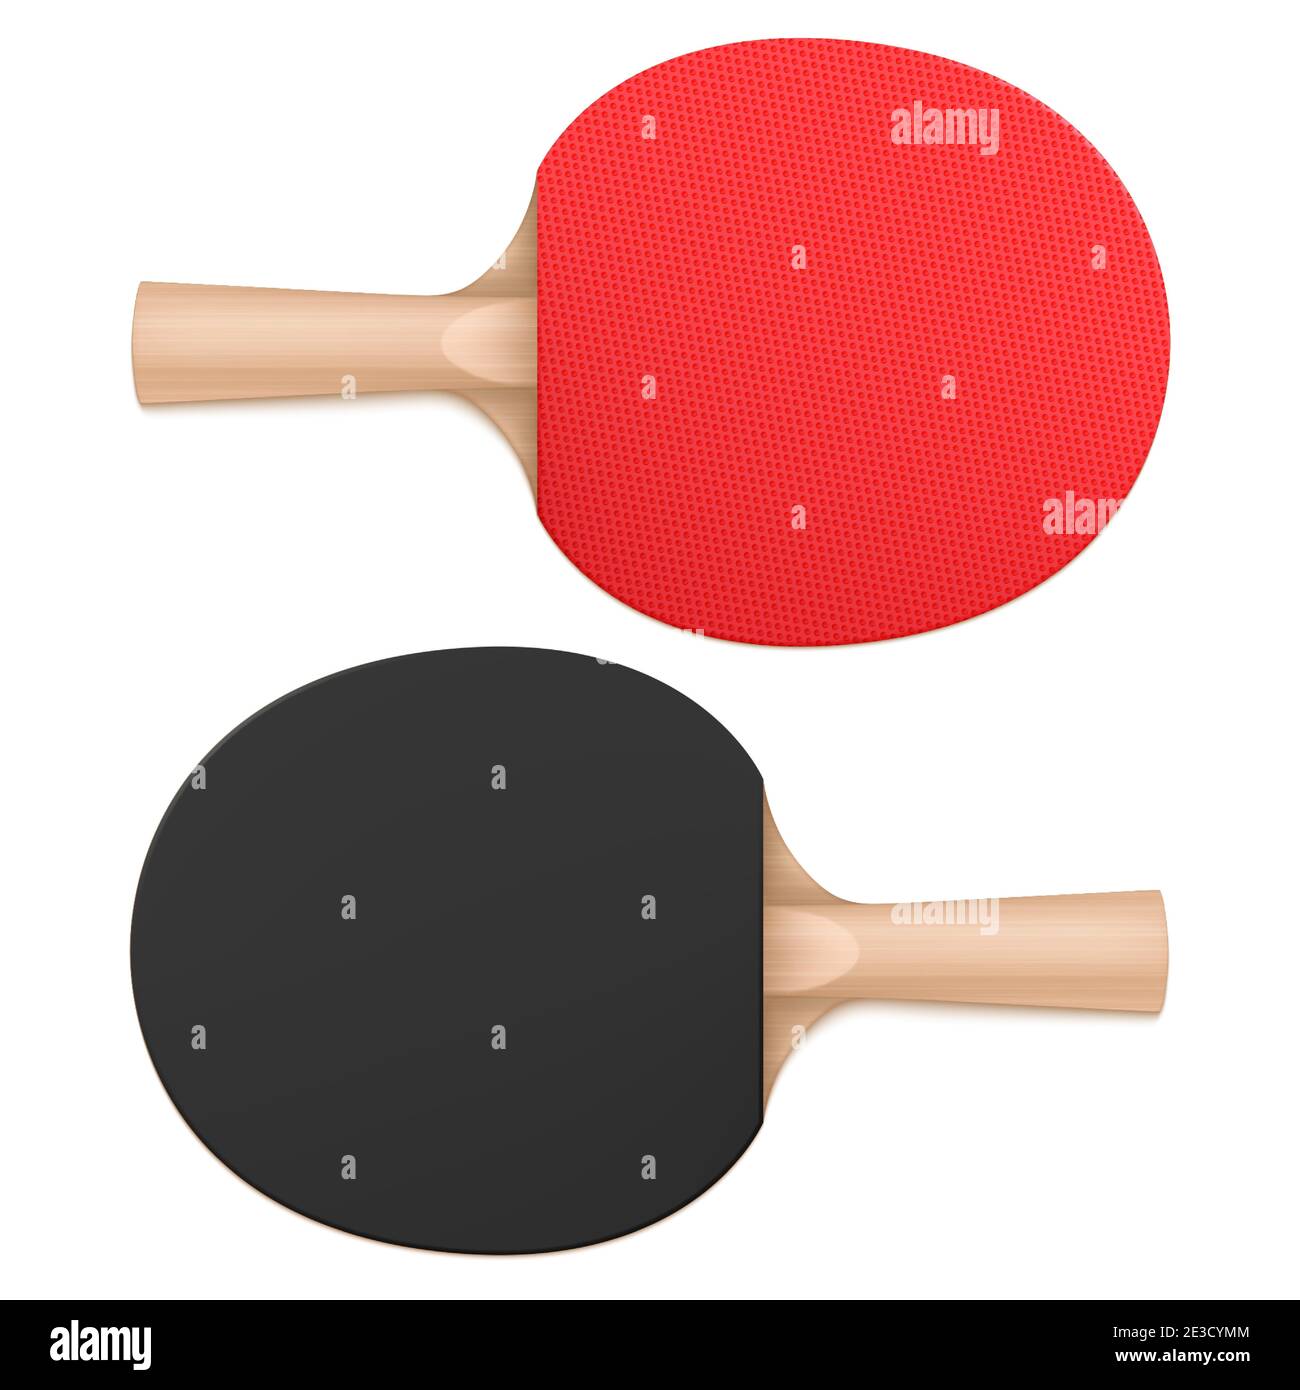 Ping pong paddles, table tennis rackets top and bottom view. Sports  equipment with wooden handle and